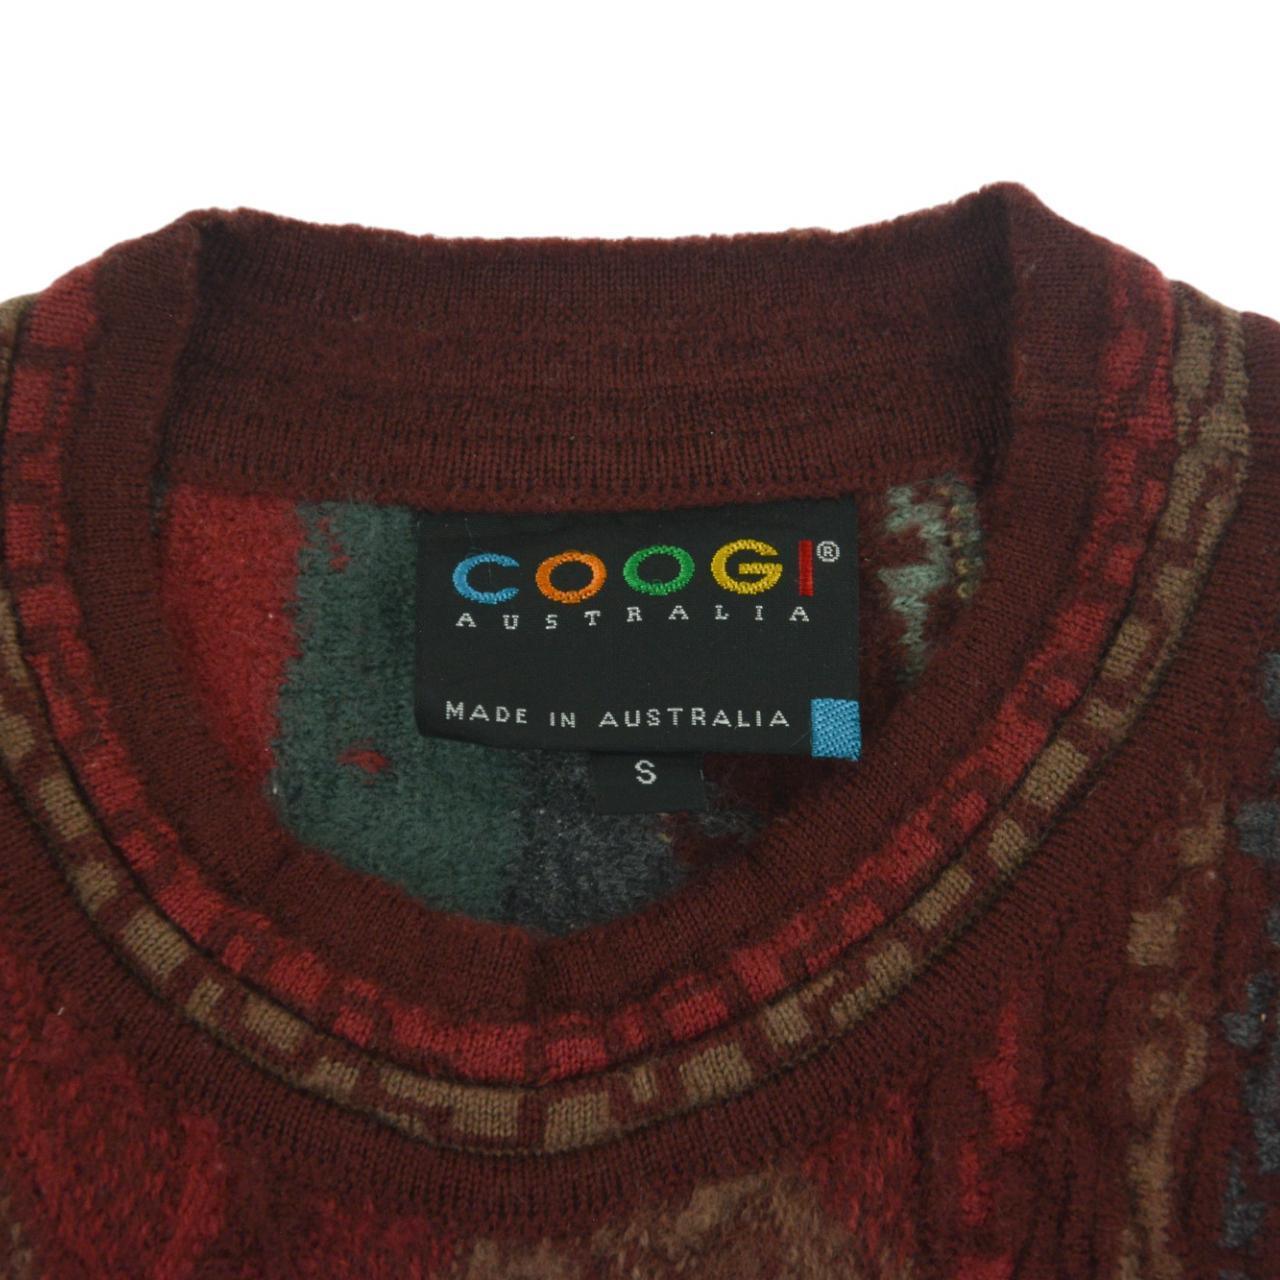 Vintage Coogi Knitted Jumper Woman’s Size S - Known Source